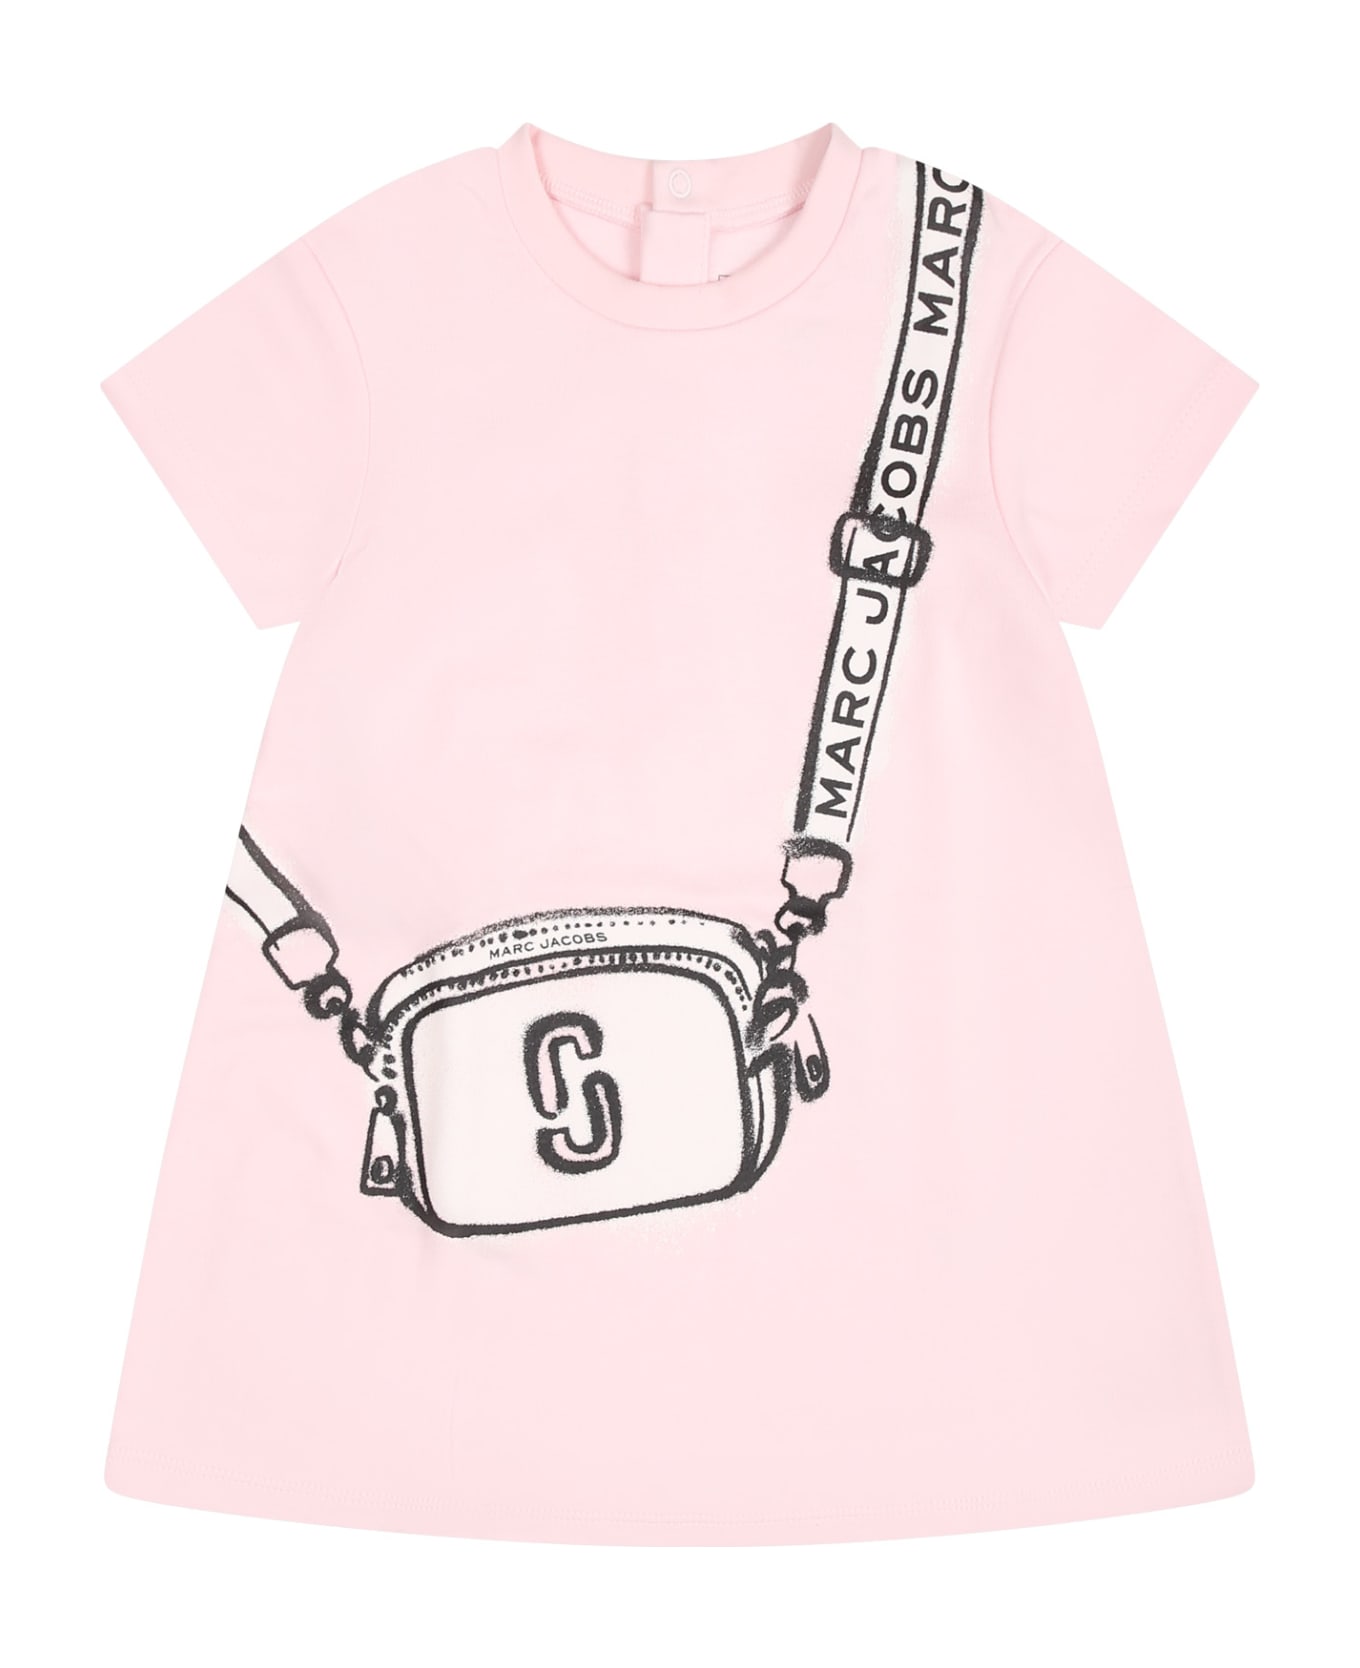 Marc Jacobs Pink Dress For Baby Girl With Iconic Bag - Pink